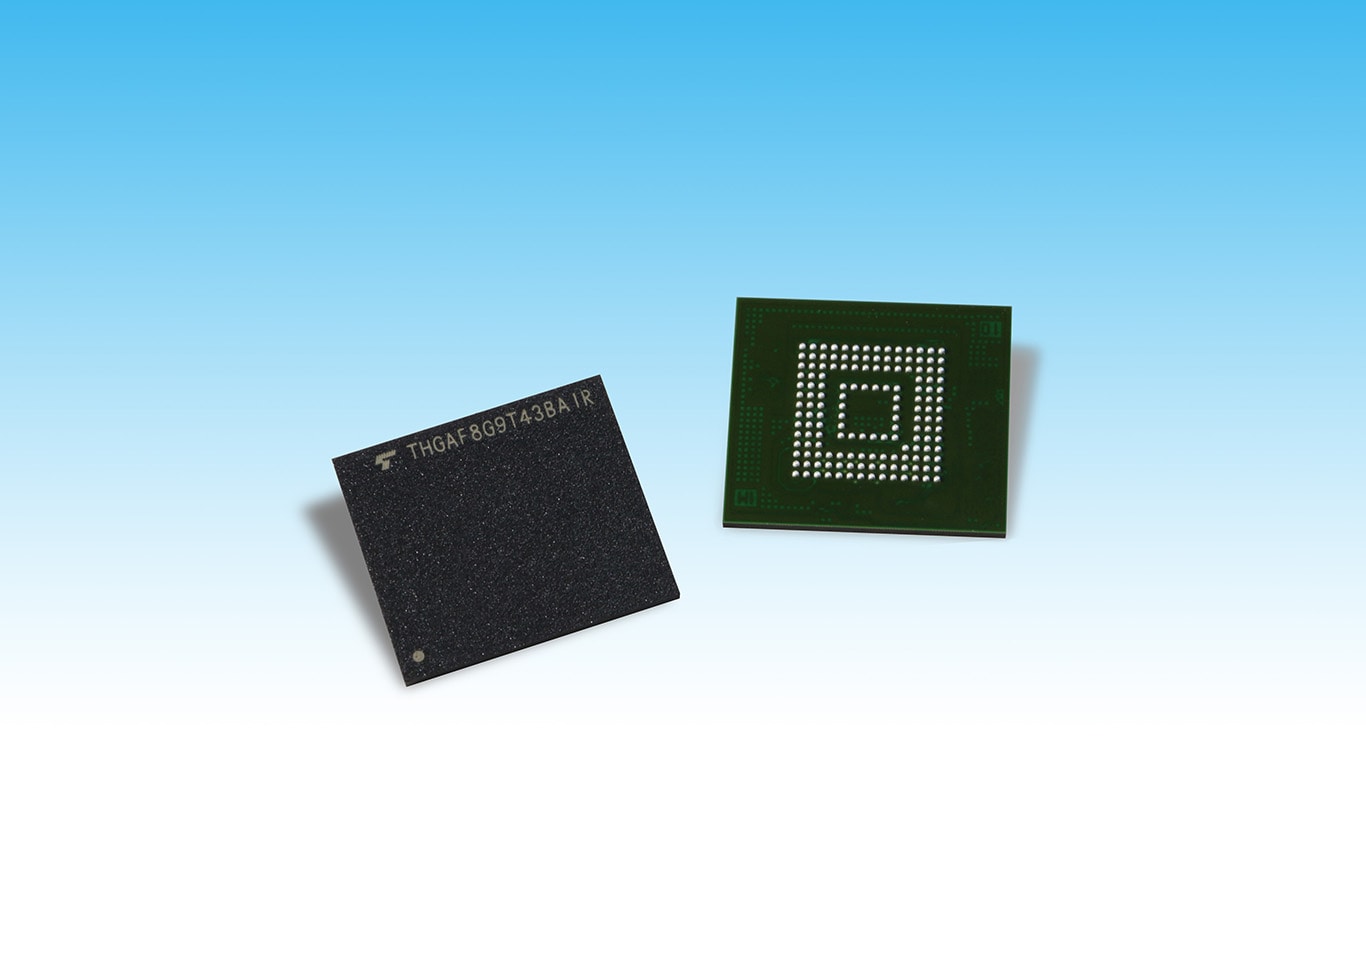 Toshiba Memory Europe Unveils UFS Devices Utilizing 64-Layer, 3D Flash Memory